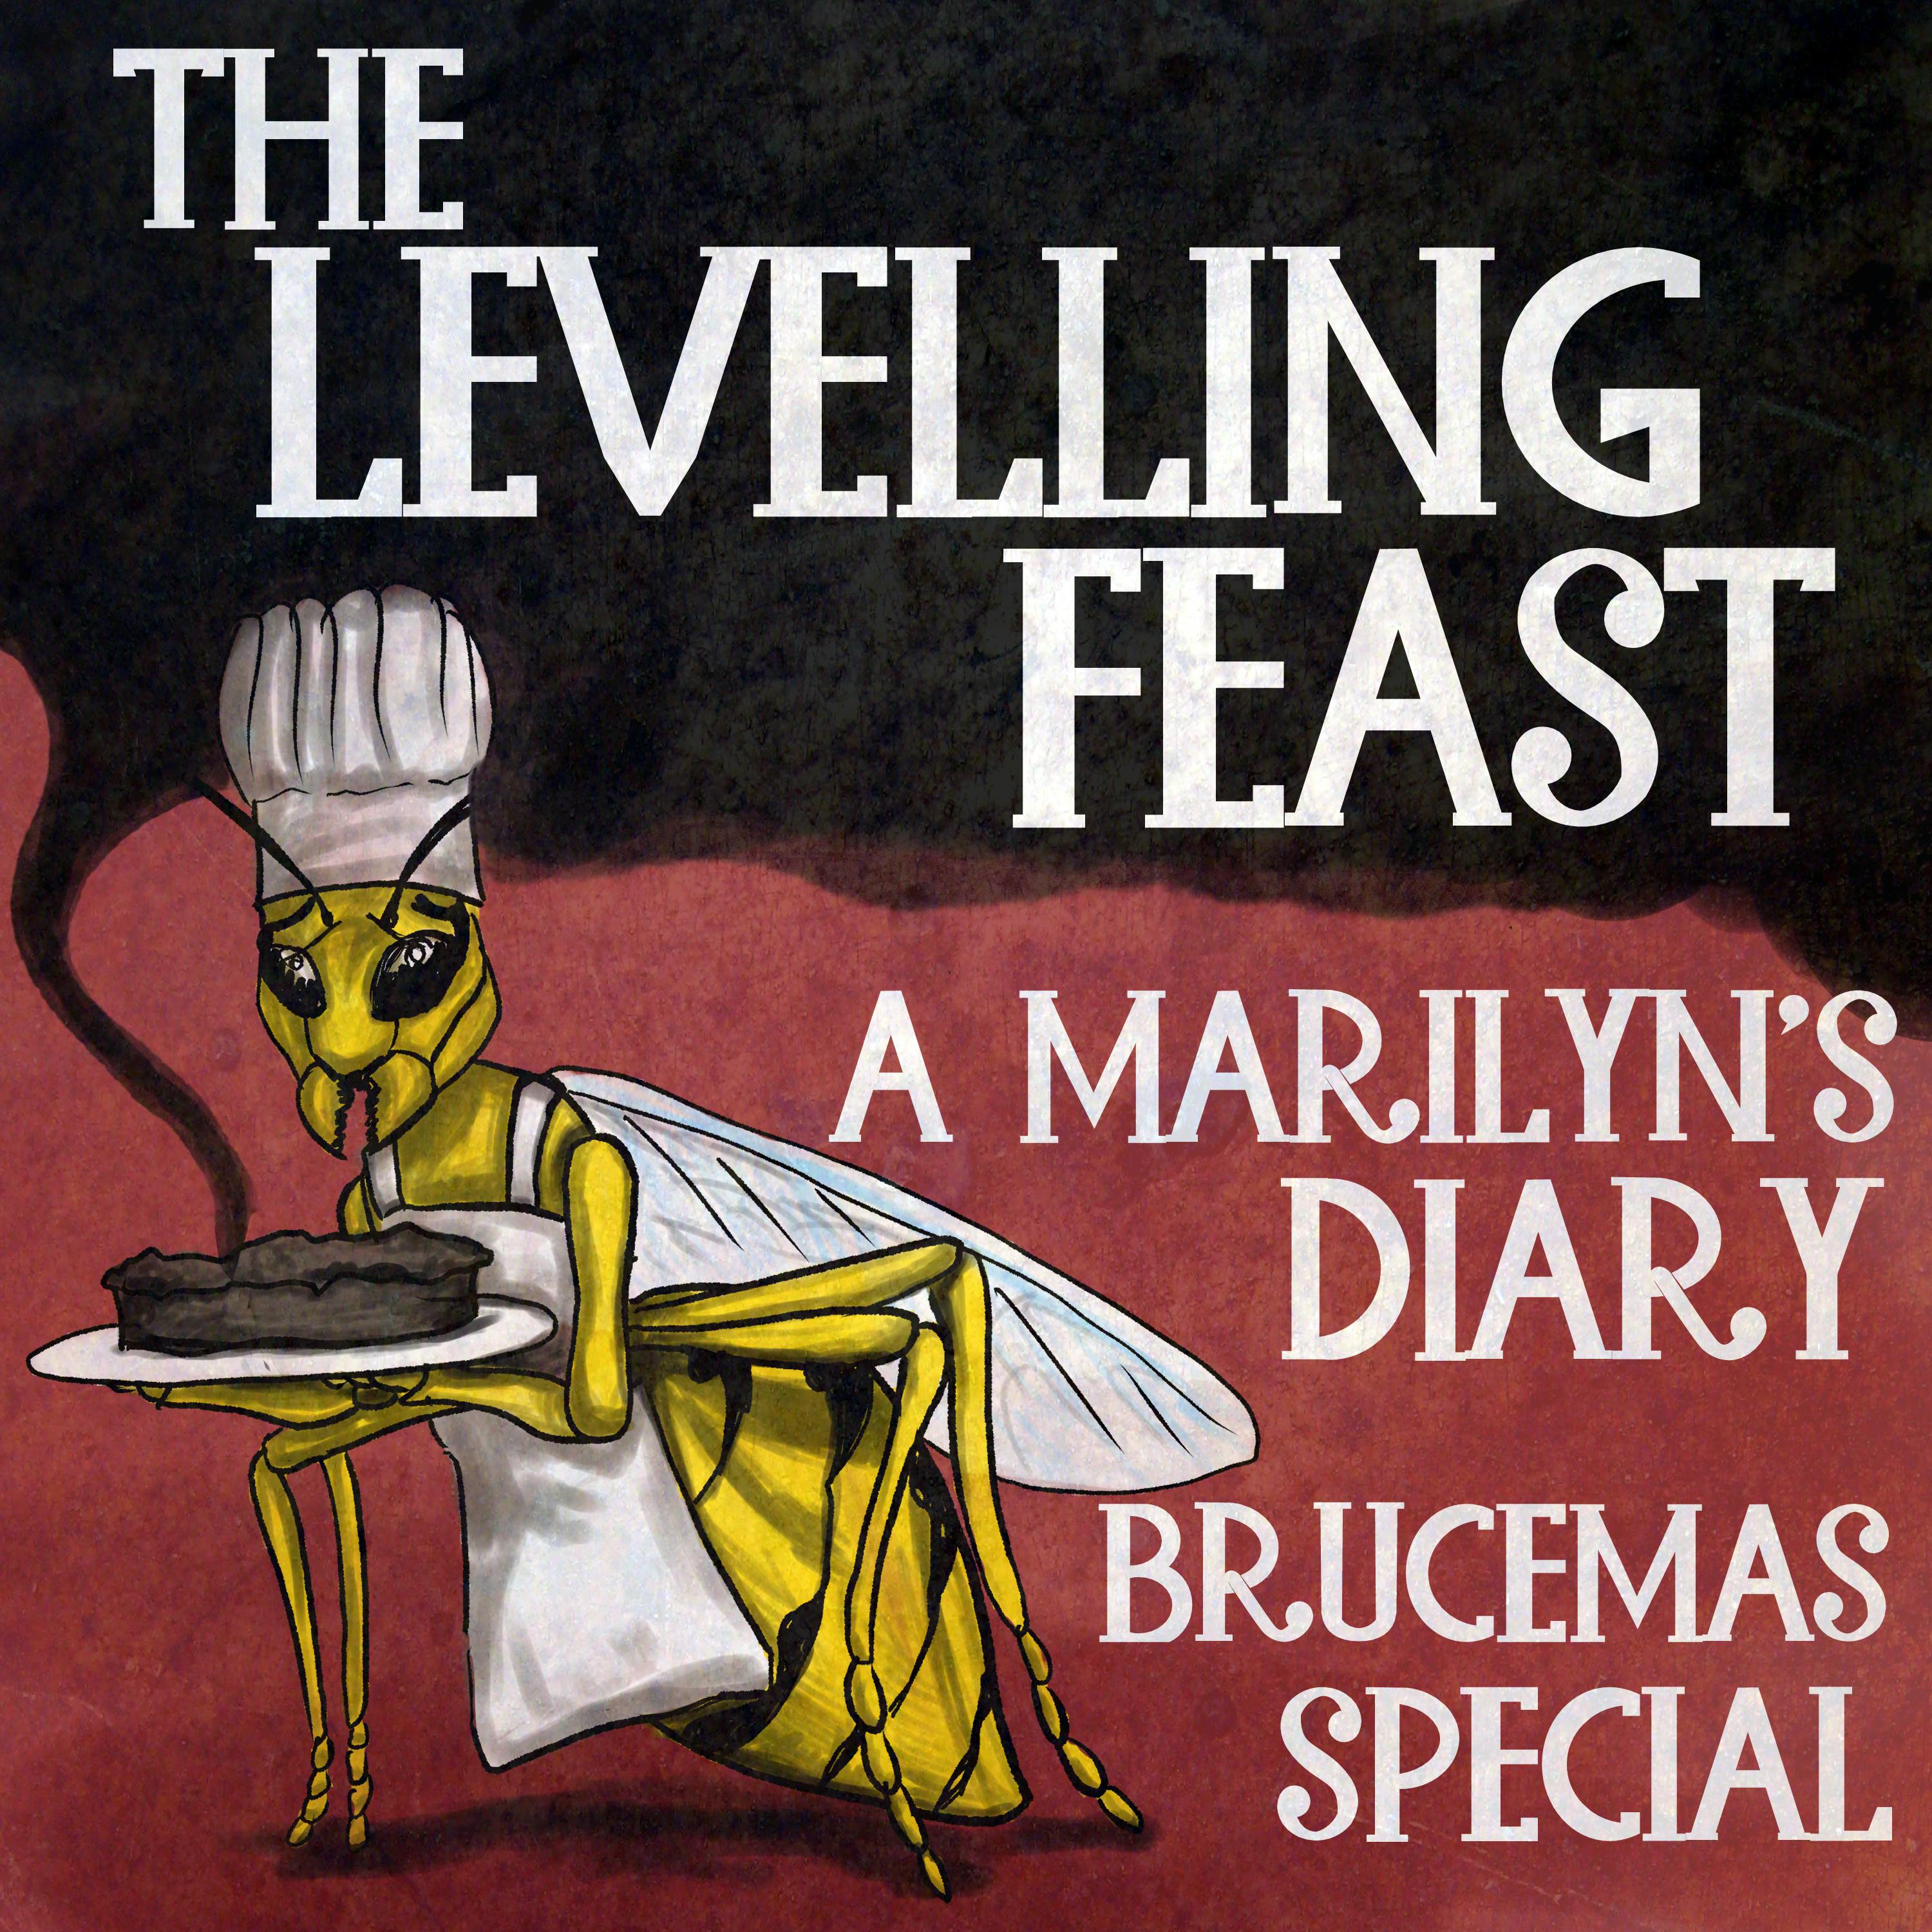 (TRAILER) The Levelling Feast: A Marilyn's Diary Brucemas Special